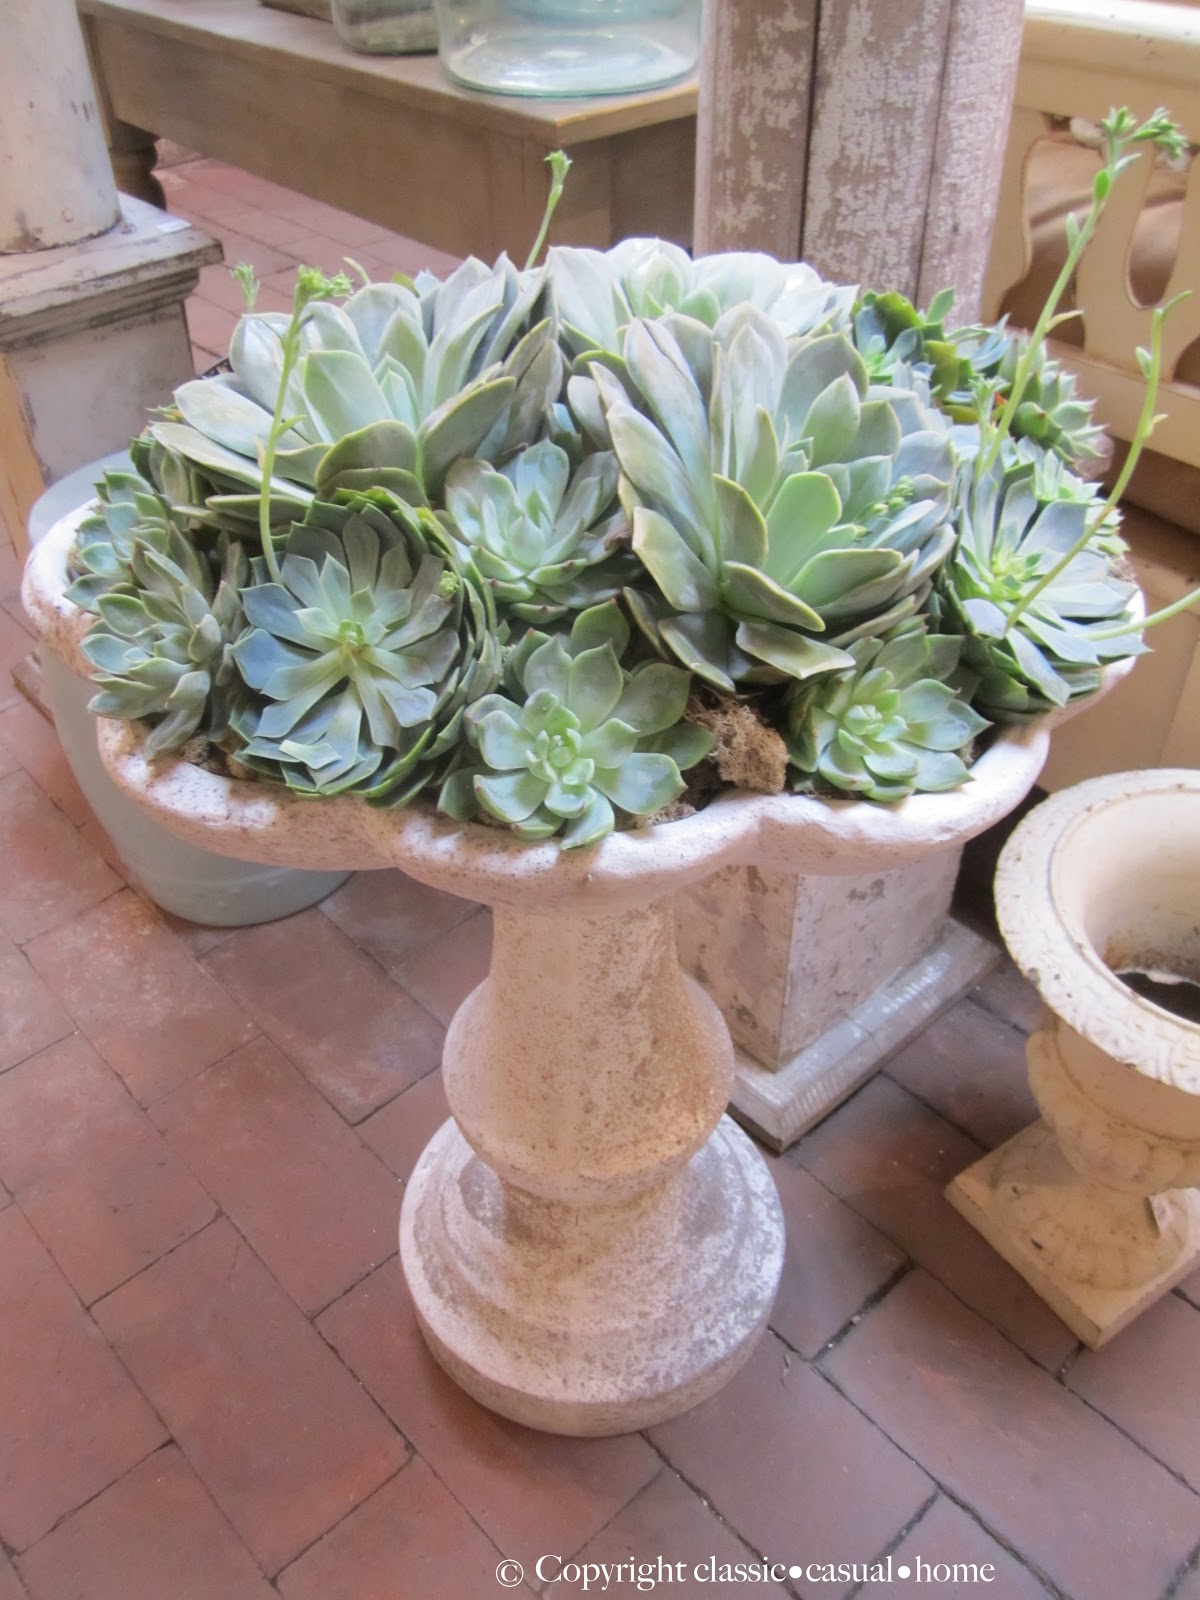 Six Easy Care Indoor Plant Ideas - Classic Casual Home